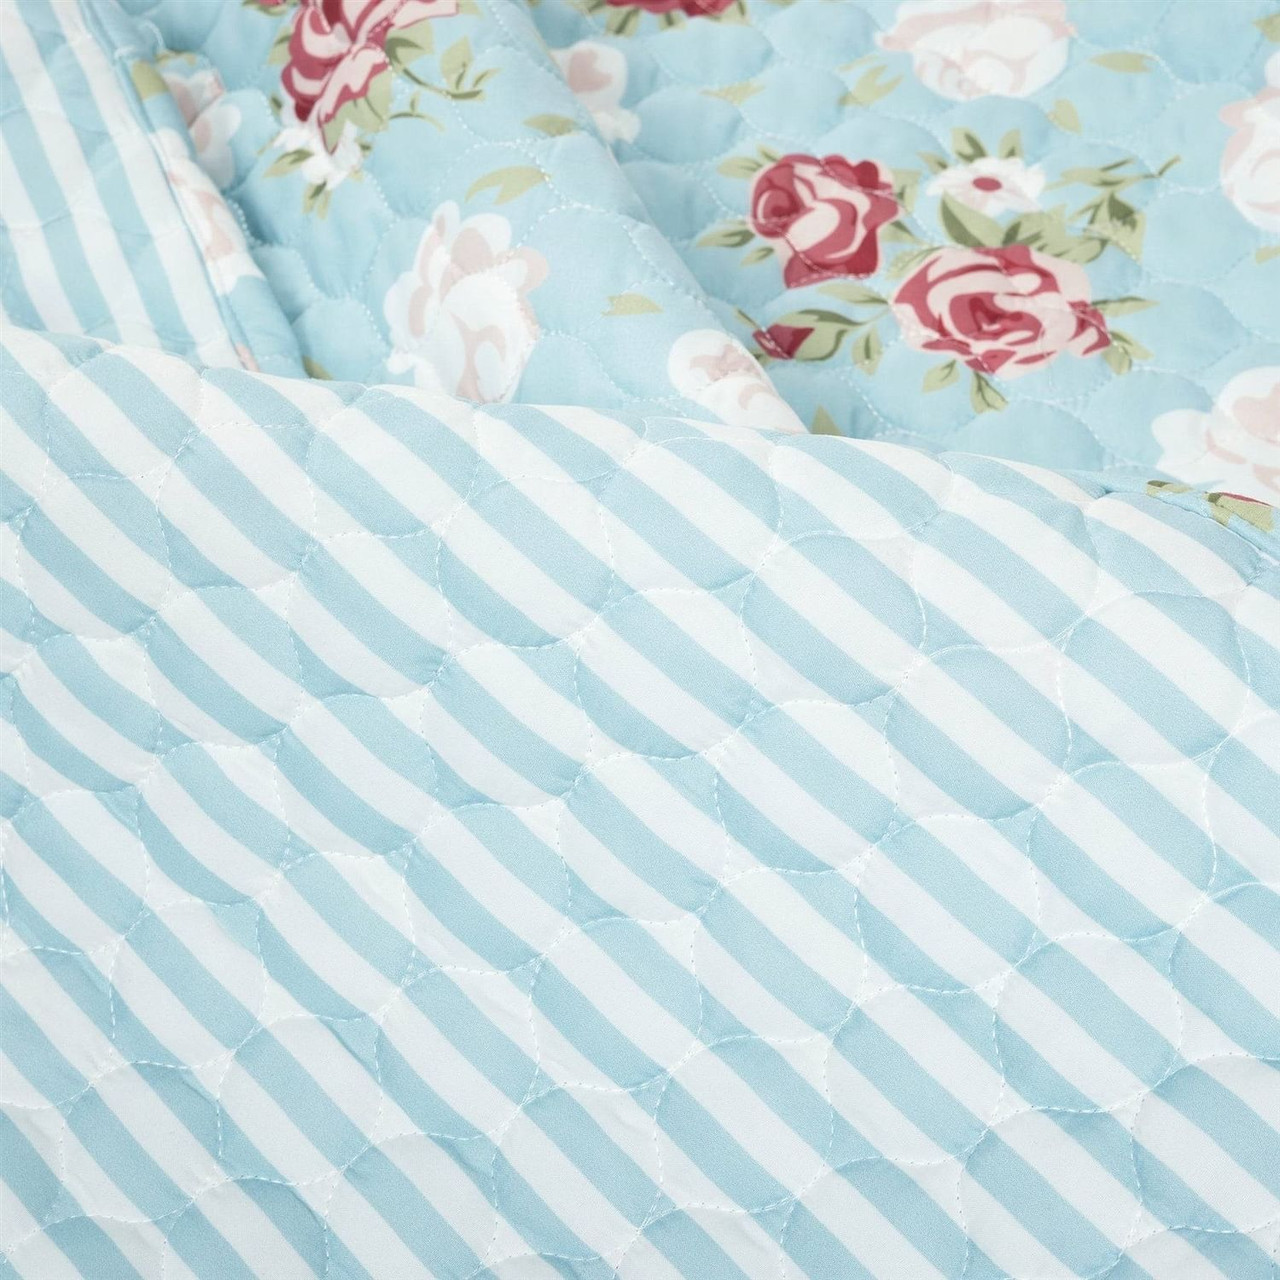 King size Vintage Rose Ruffle Edge Light Quilt Set in Blue White and Pink